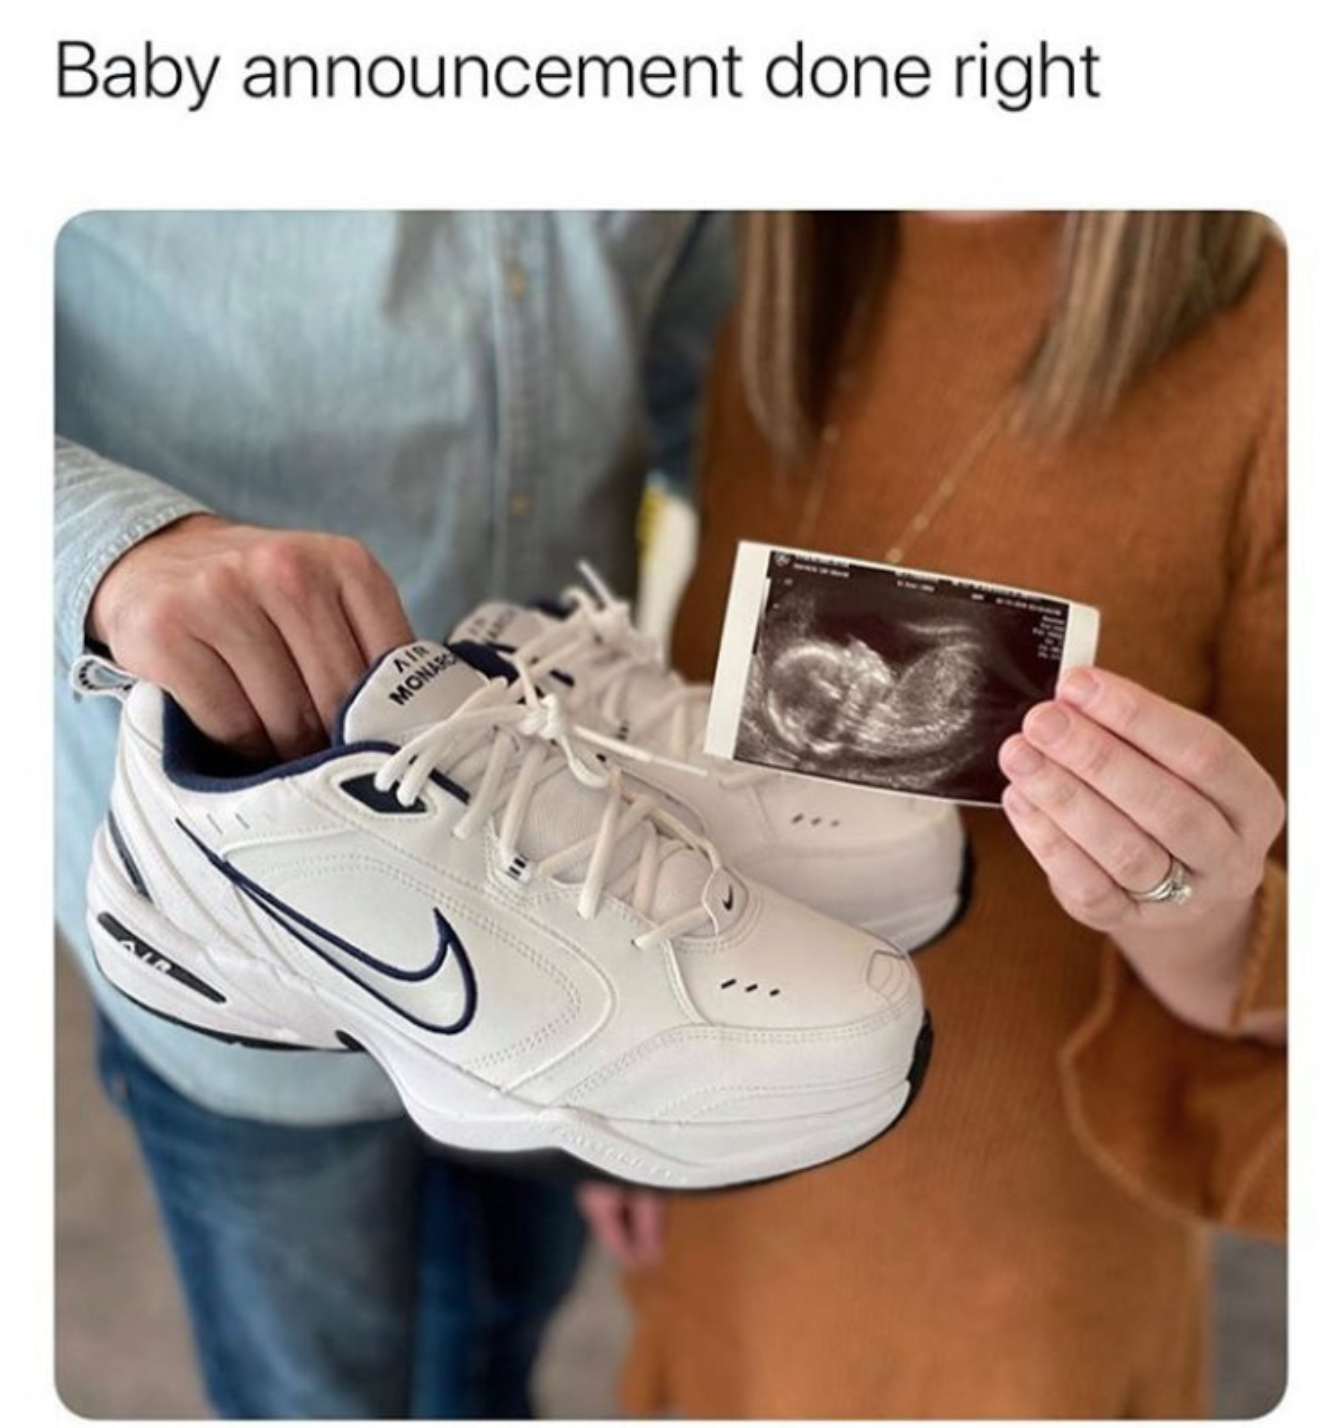 dad shoes meme - Baby announcement done right